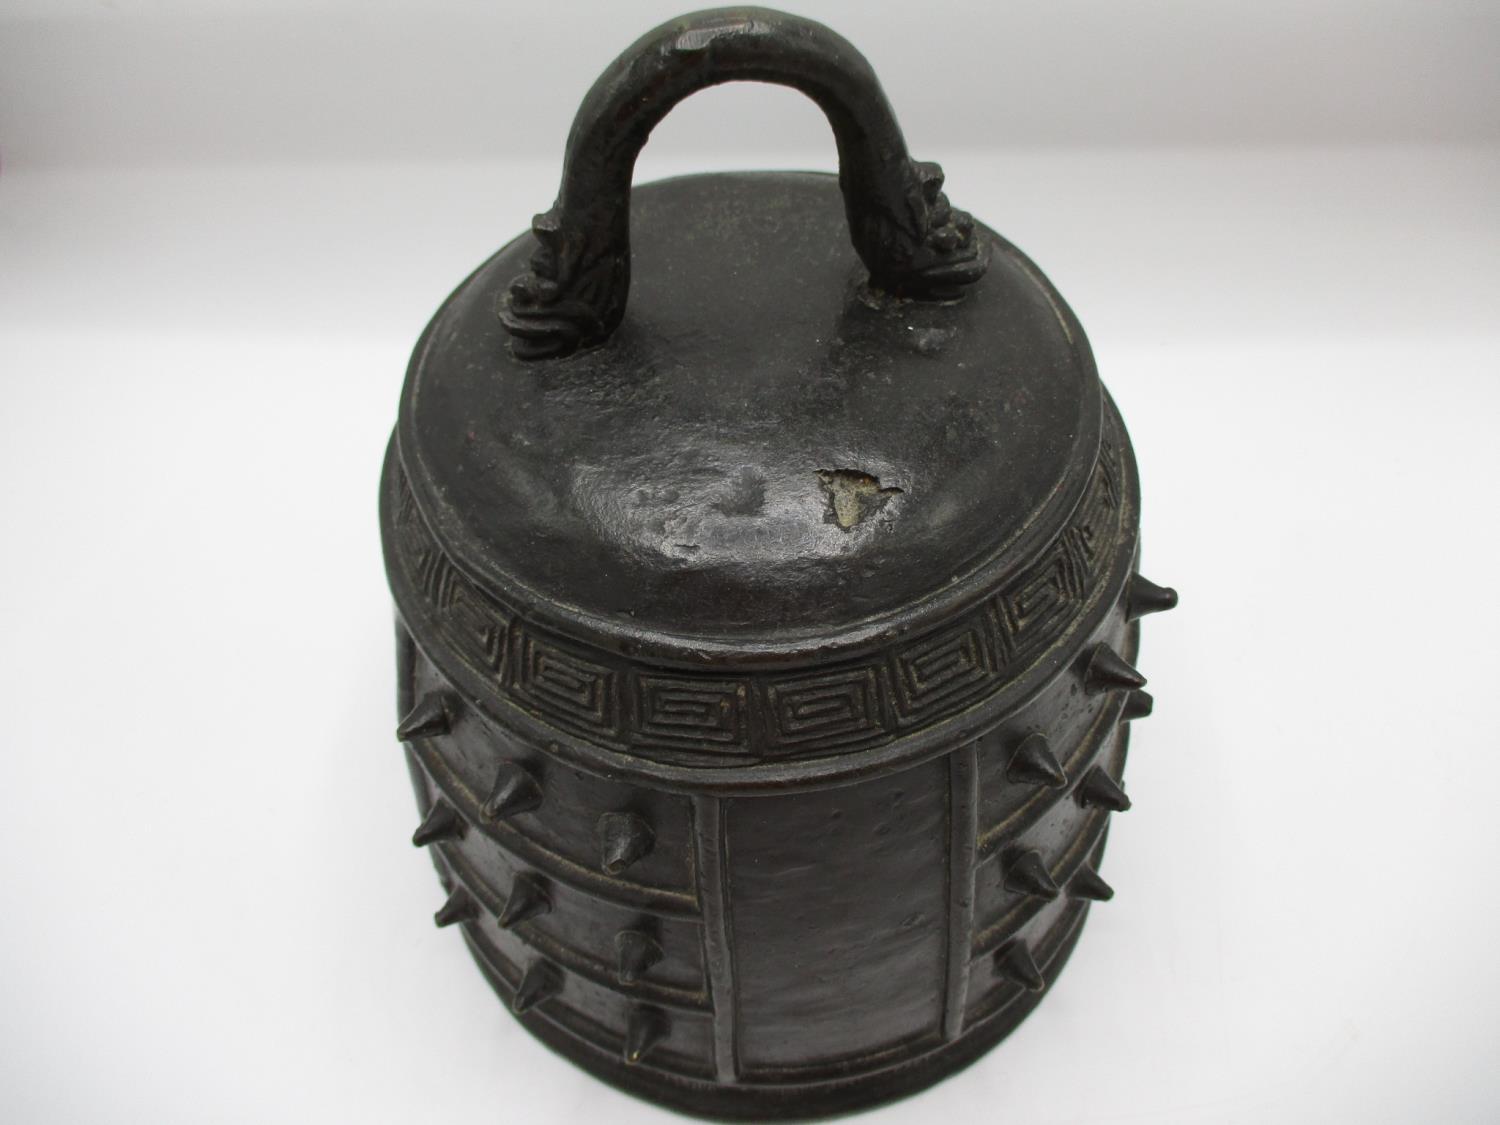 A Qing Dynasty Chinese bronze Bianzhong or chime bell with a twin mask handle, panels of - Image 7 of 7